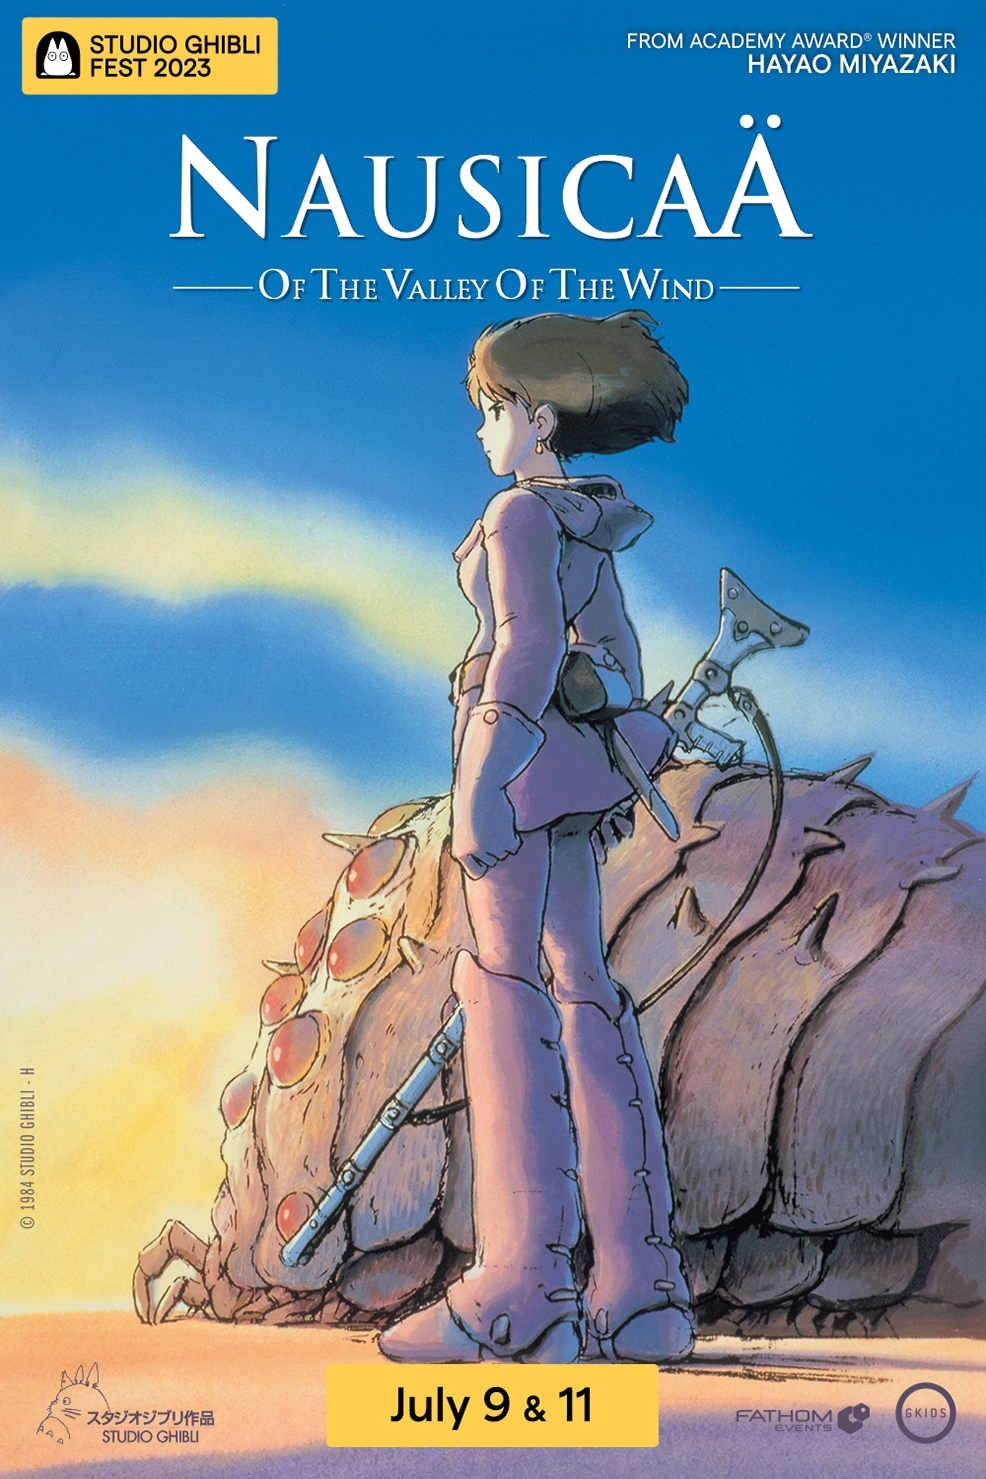 Poster of Nausicaä of the Valley of the Wind - Studio Ghibli Fest 2023